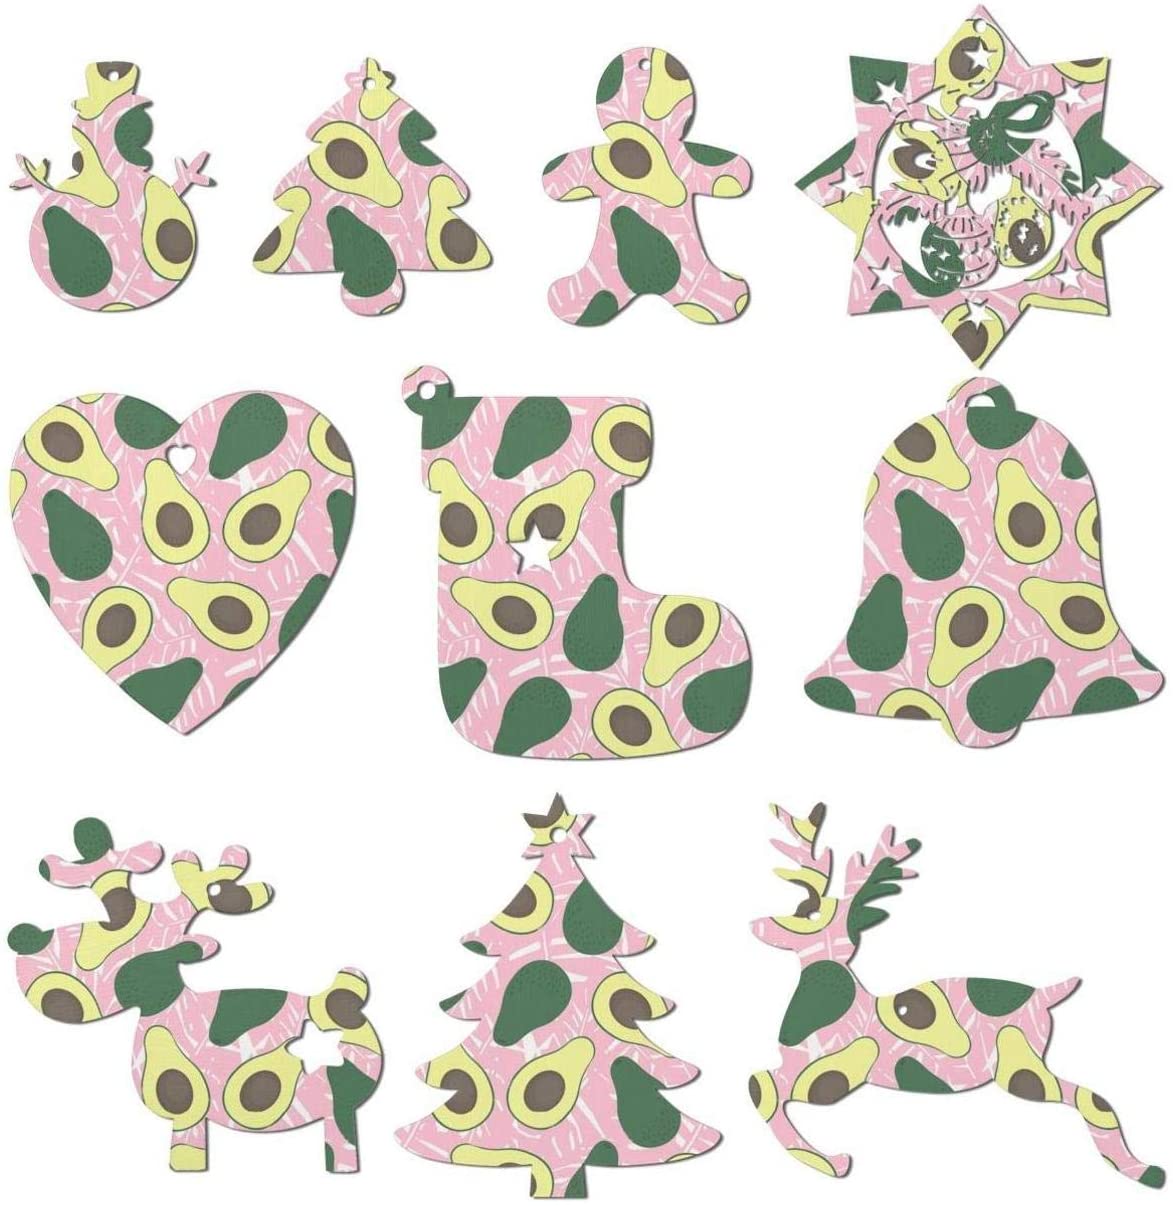 Set Of 10 Pieces Avocado Cute Nature Pink Background Christmas Ornaments Christmas Hanging Decoration Include Snowman Christmas Tree Reindeer and Angel for Xmas Tree Holiday Wedding Party: Kitchen & Dining